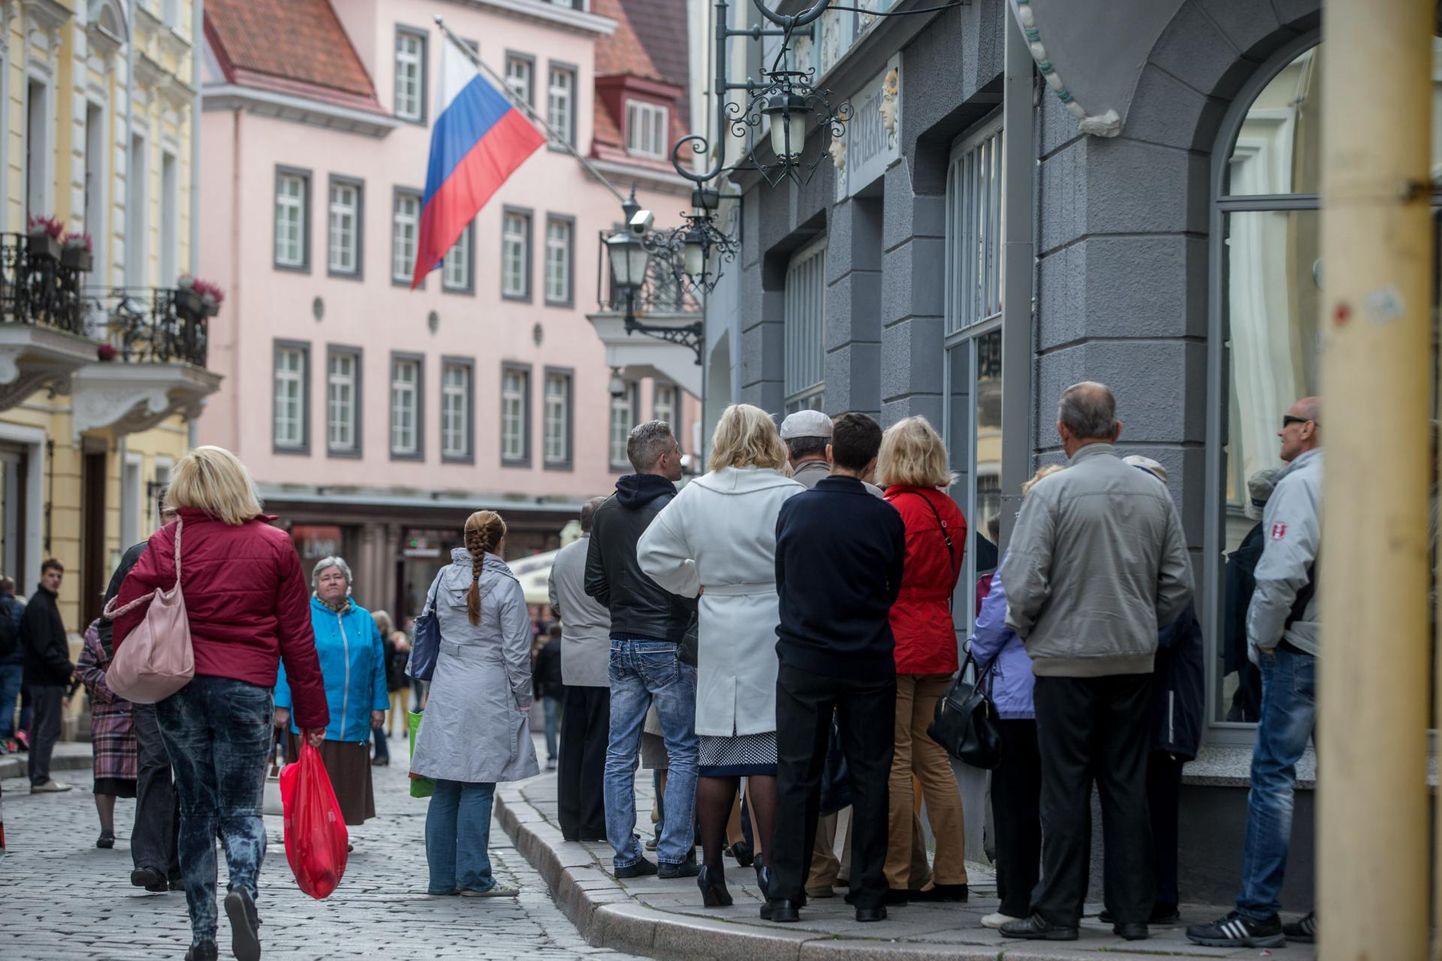 Russian citizens also took the opportunity to vote in the 2016 State Duma elections in the embassy building on Pikk Street in Tallinn.